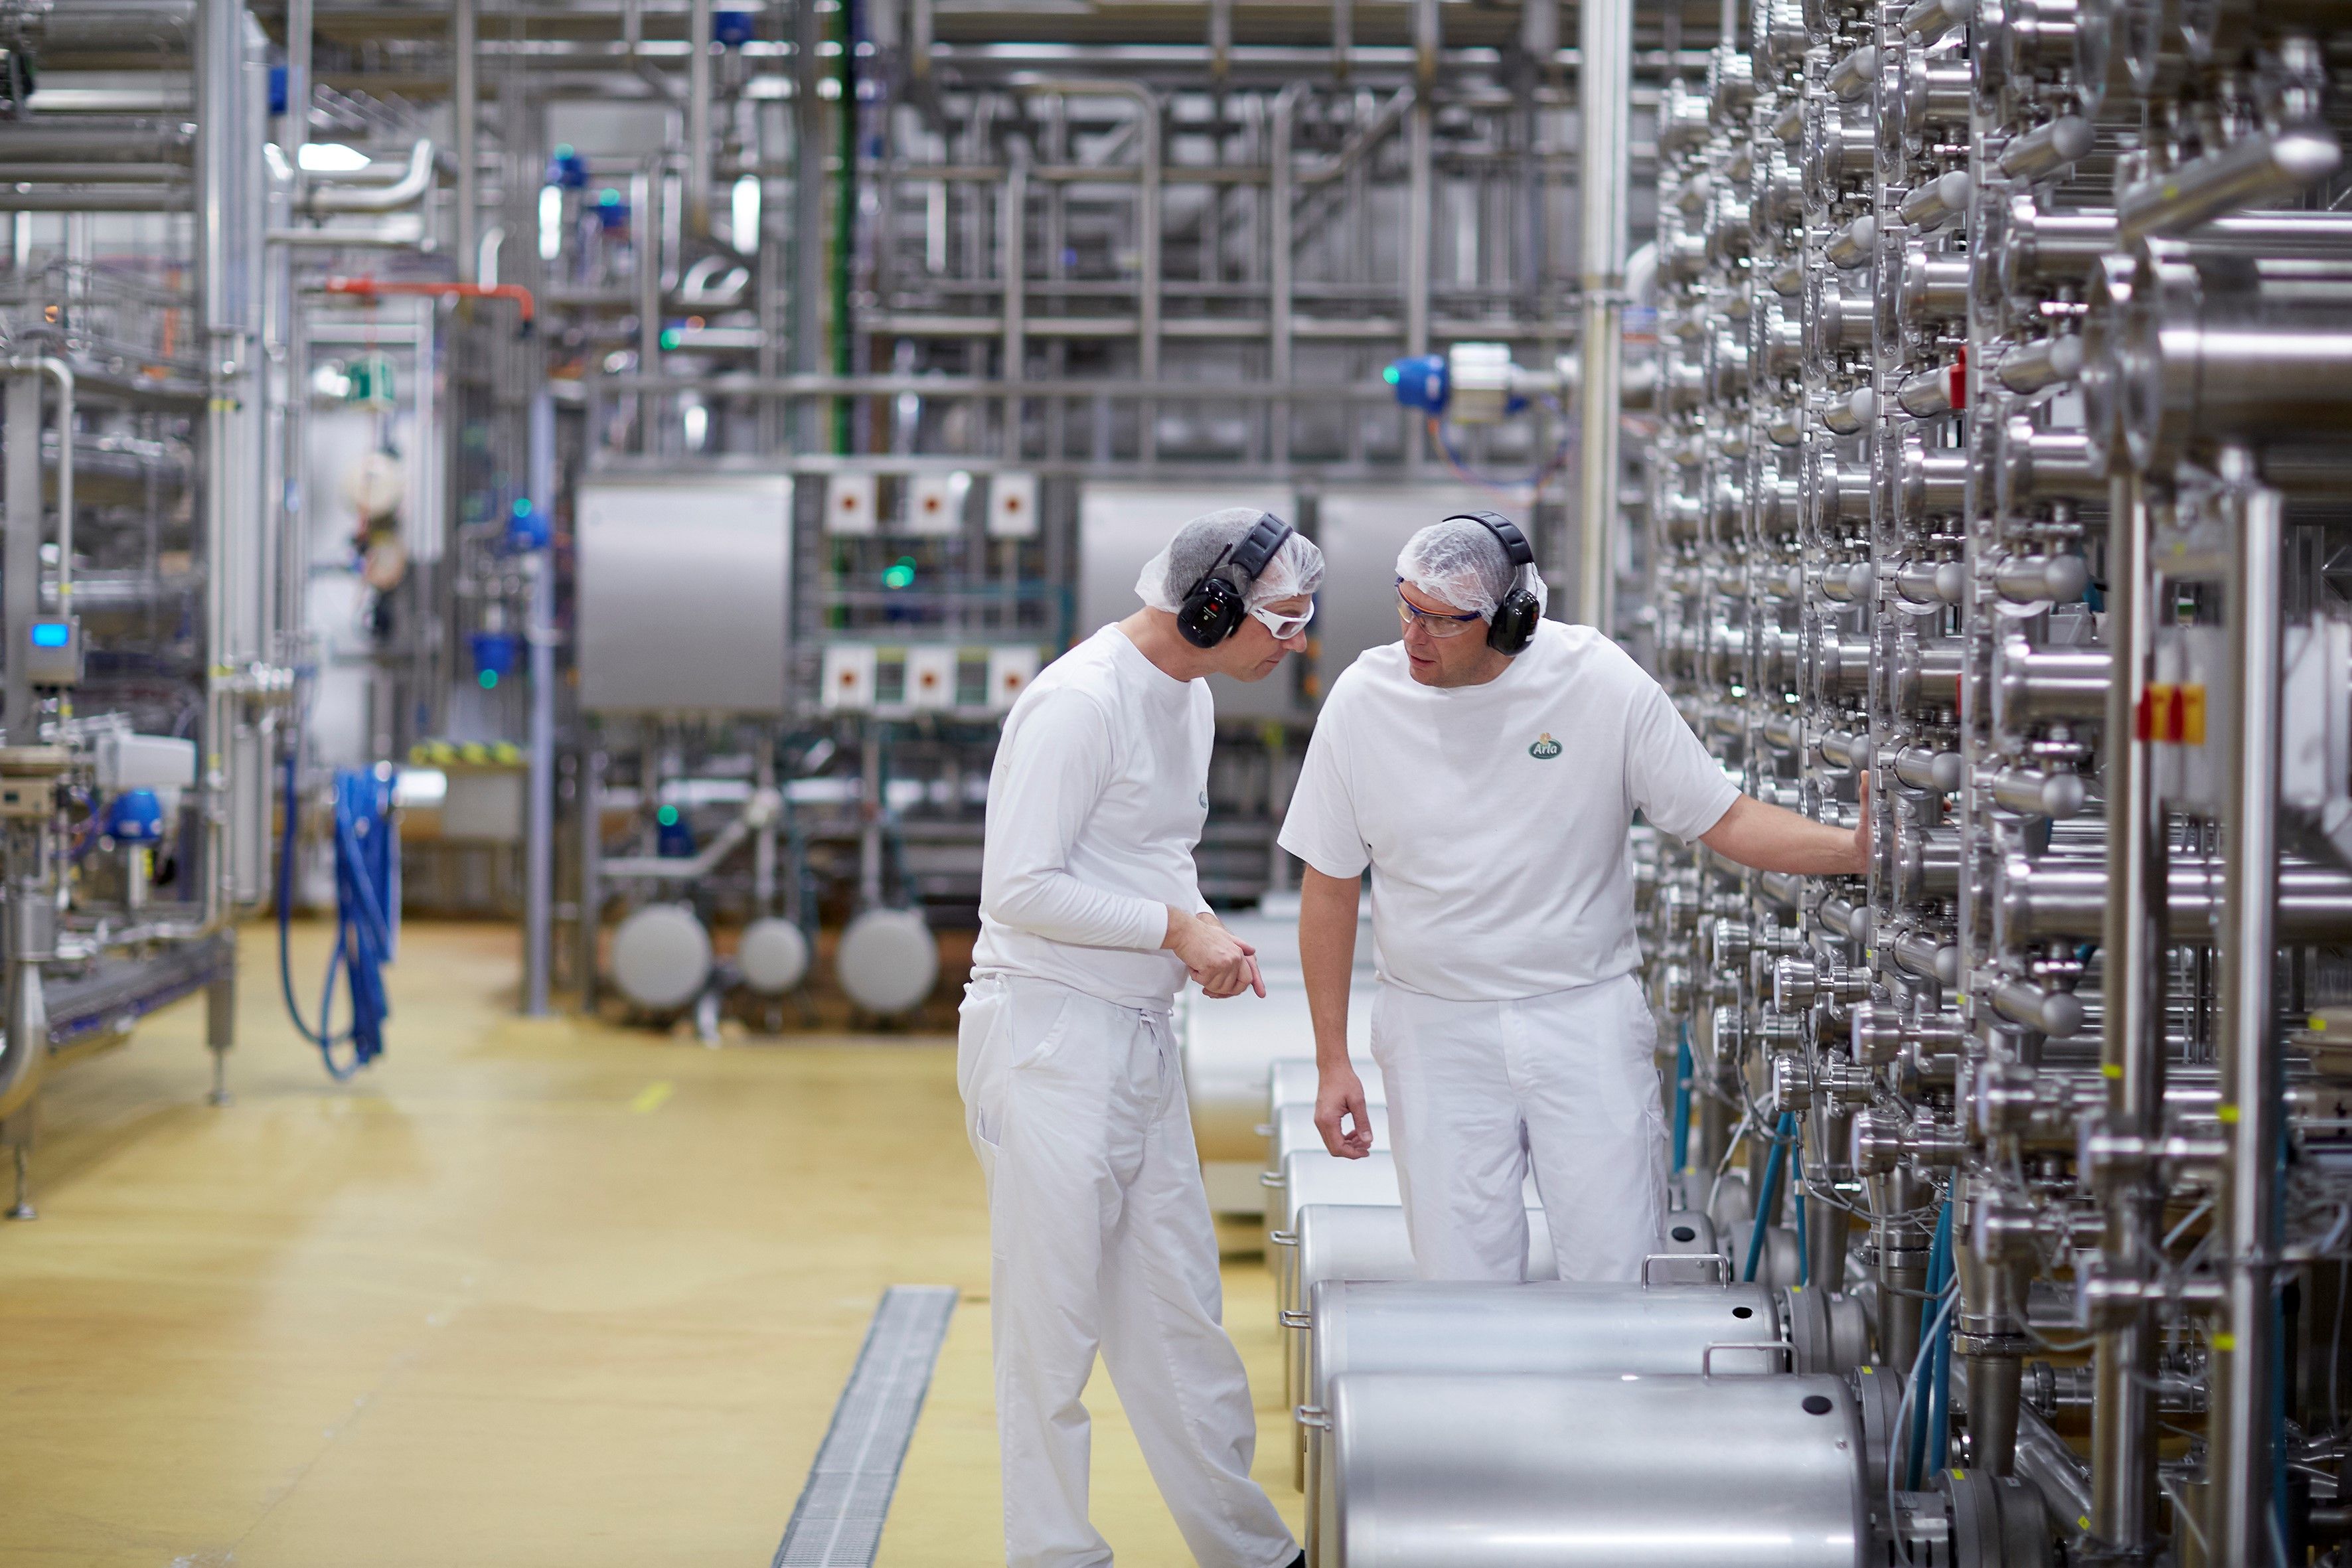 Arla Foods Ingredients is revealing details of its quality and food safety processes.